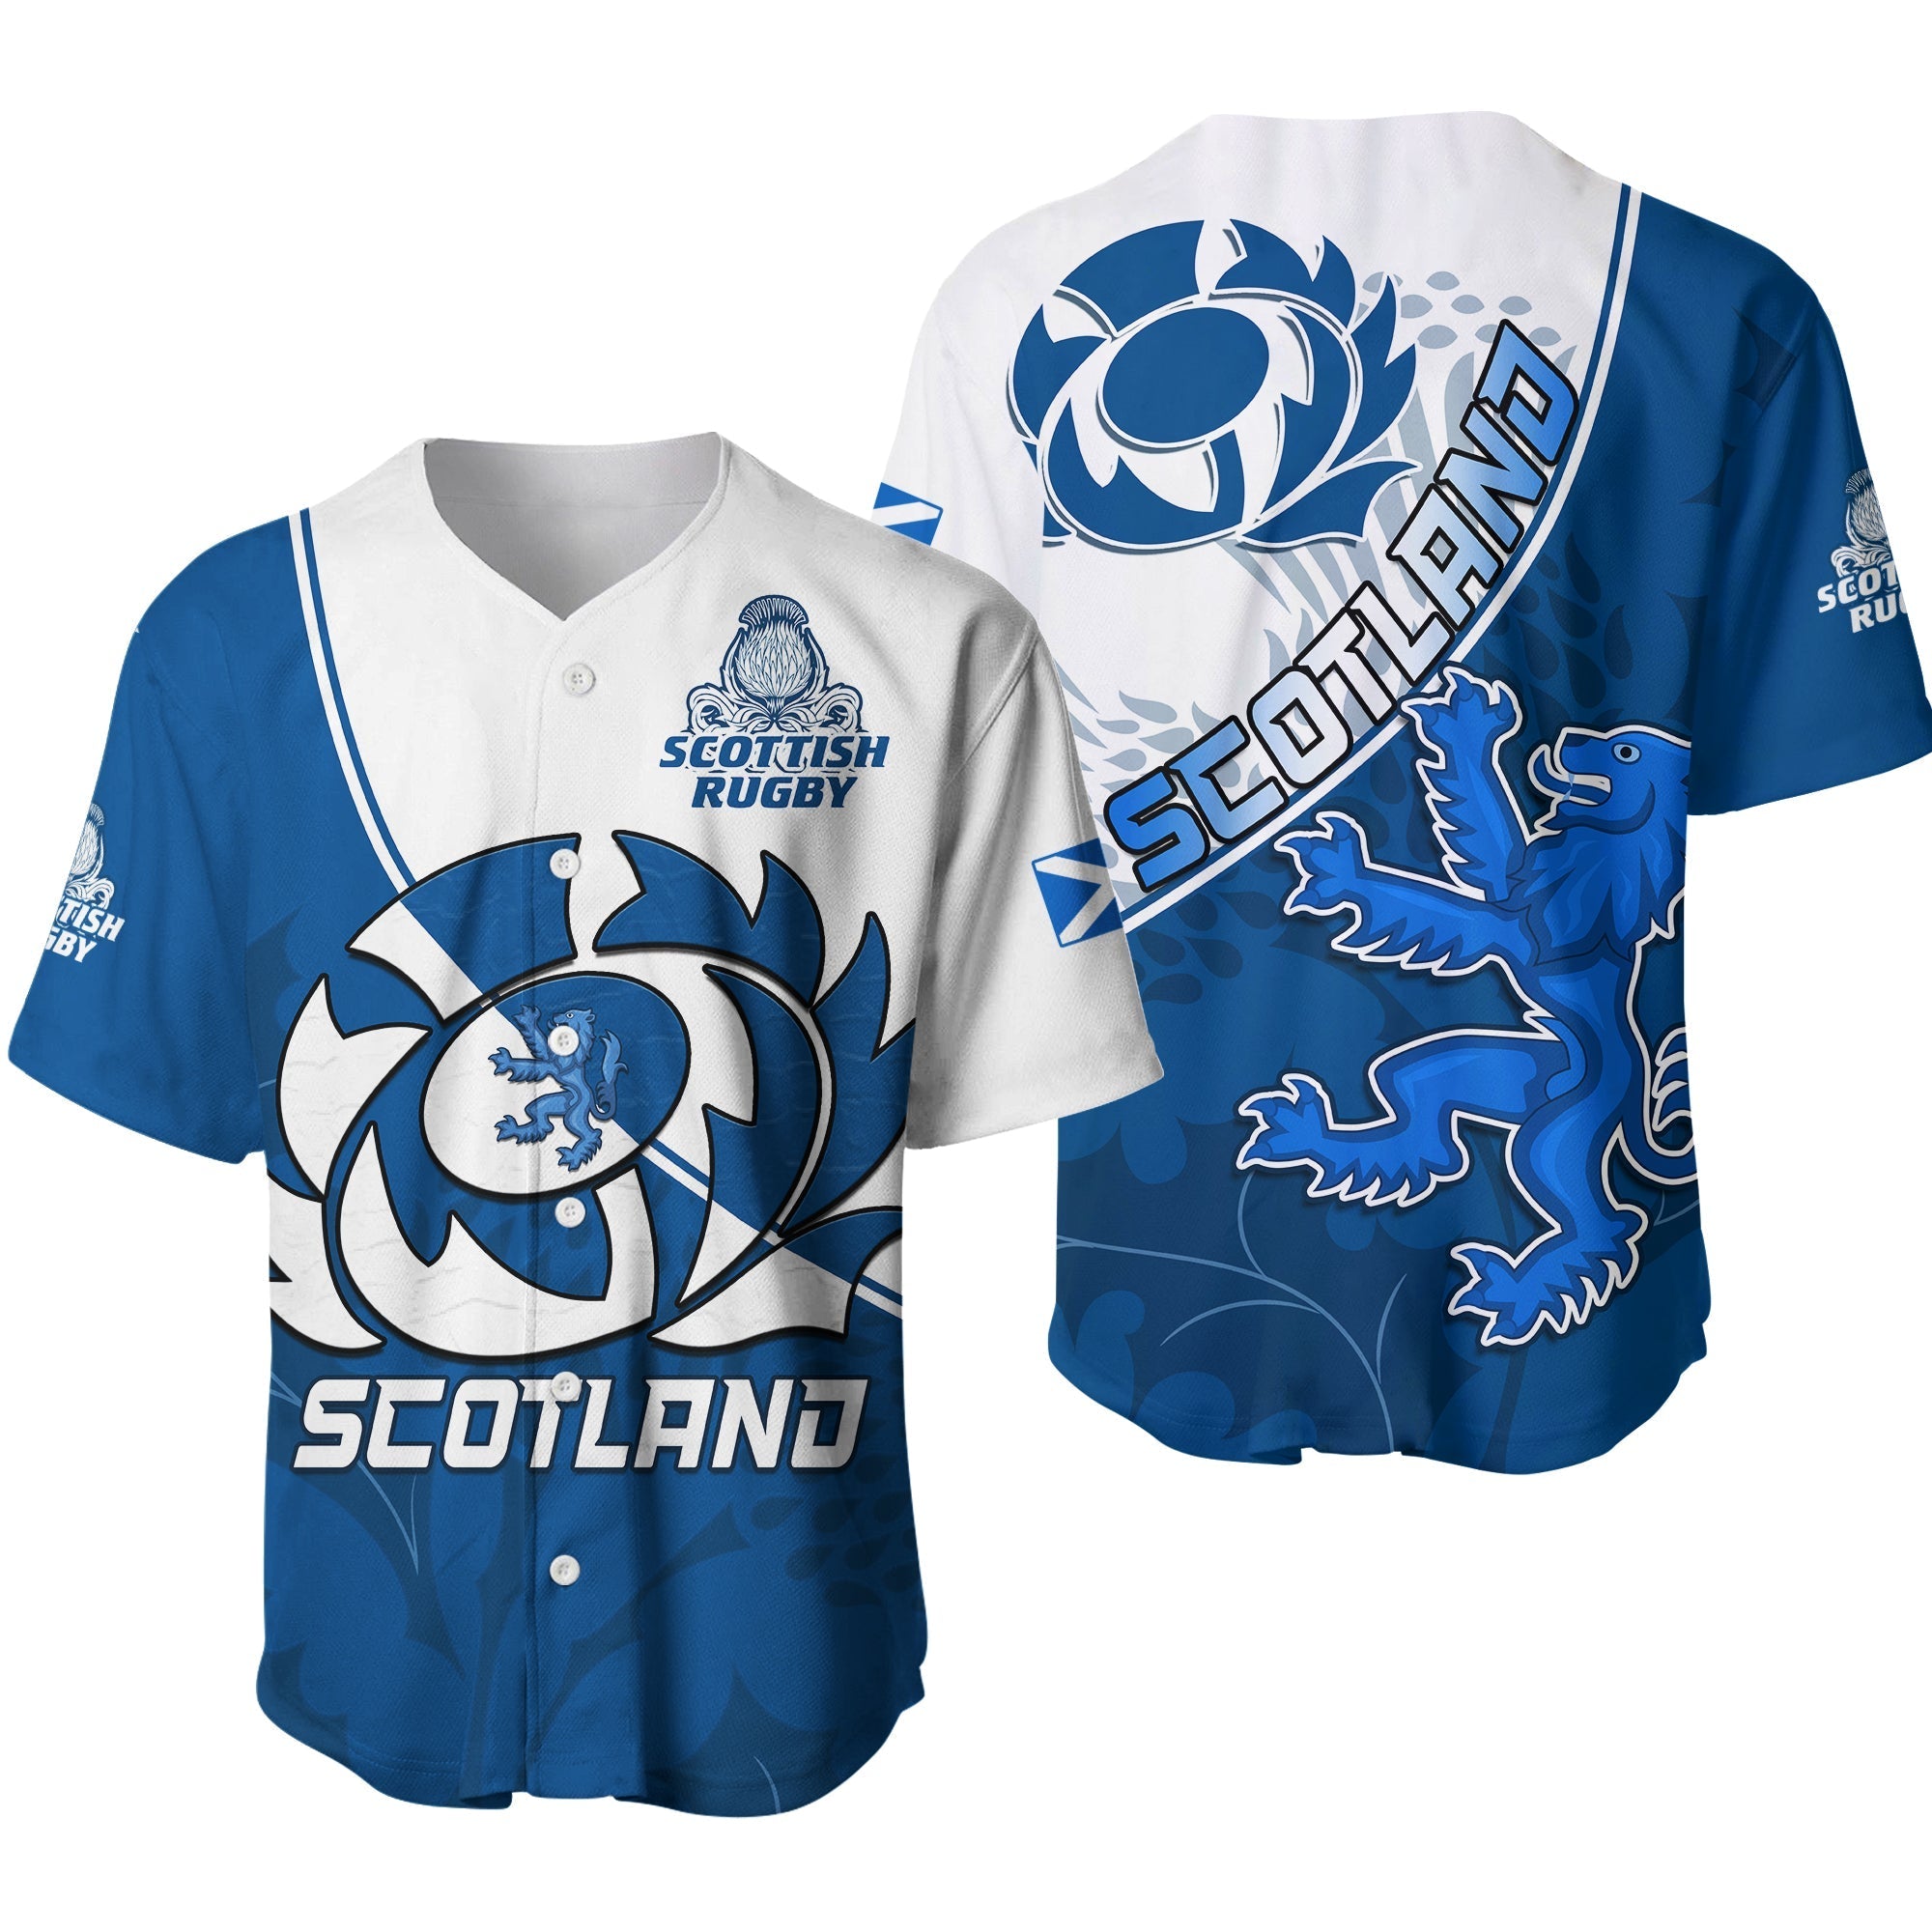 scotland-rugby-baseball-jersey-scottish-coat-of-arms-mix-thistle-newest-version